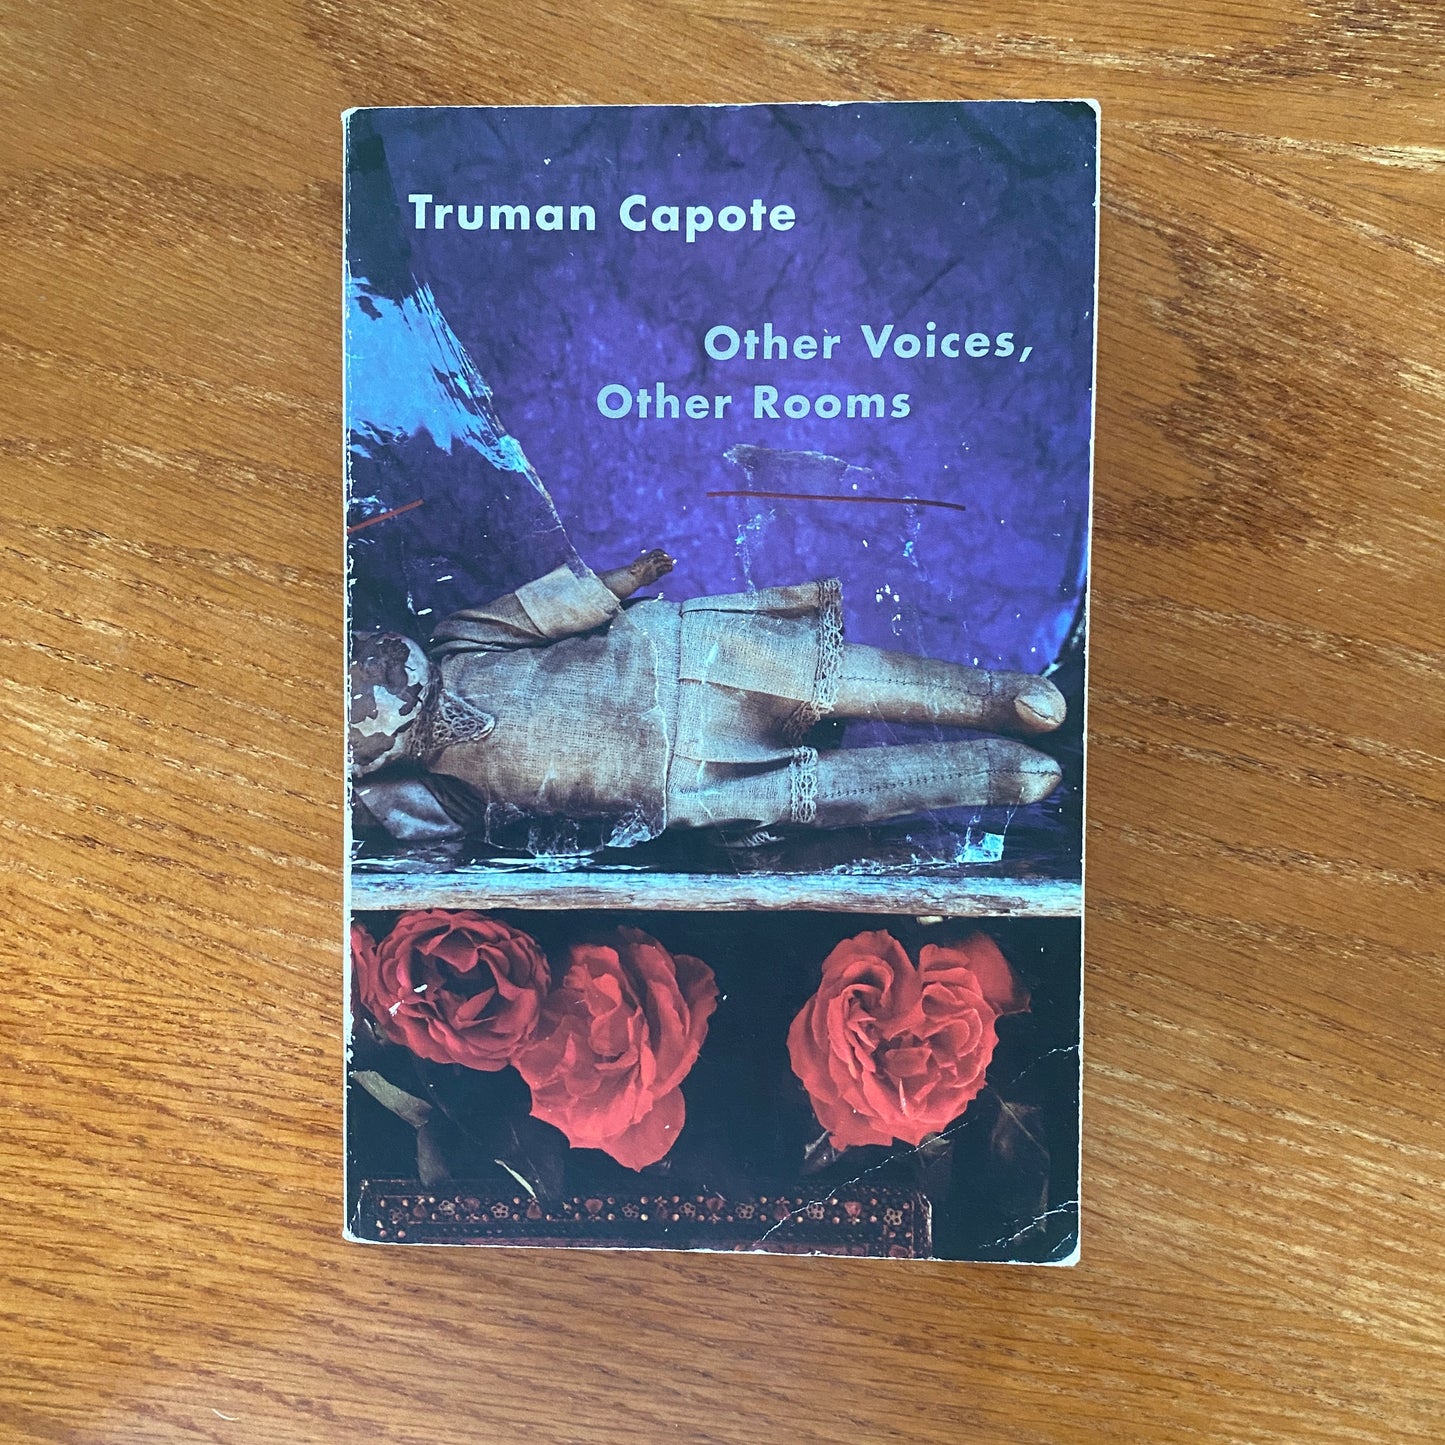 Truman Capote - Other Voices Other Rooms